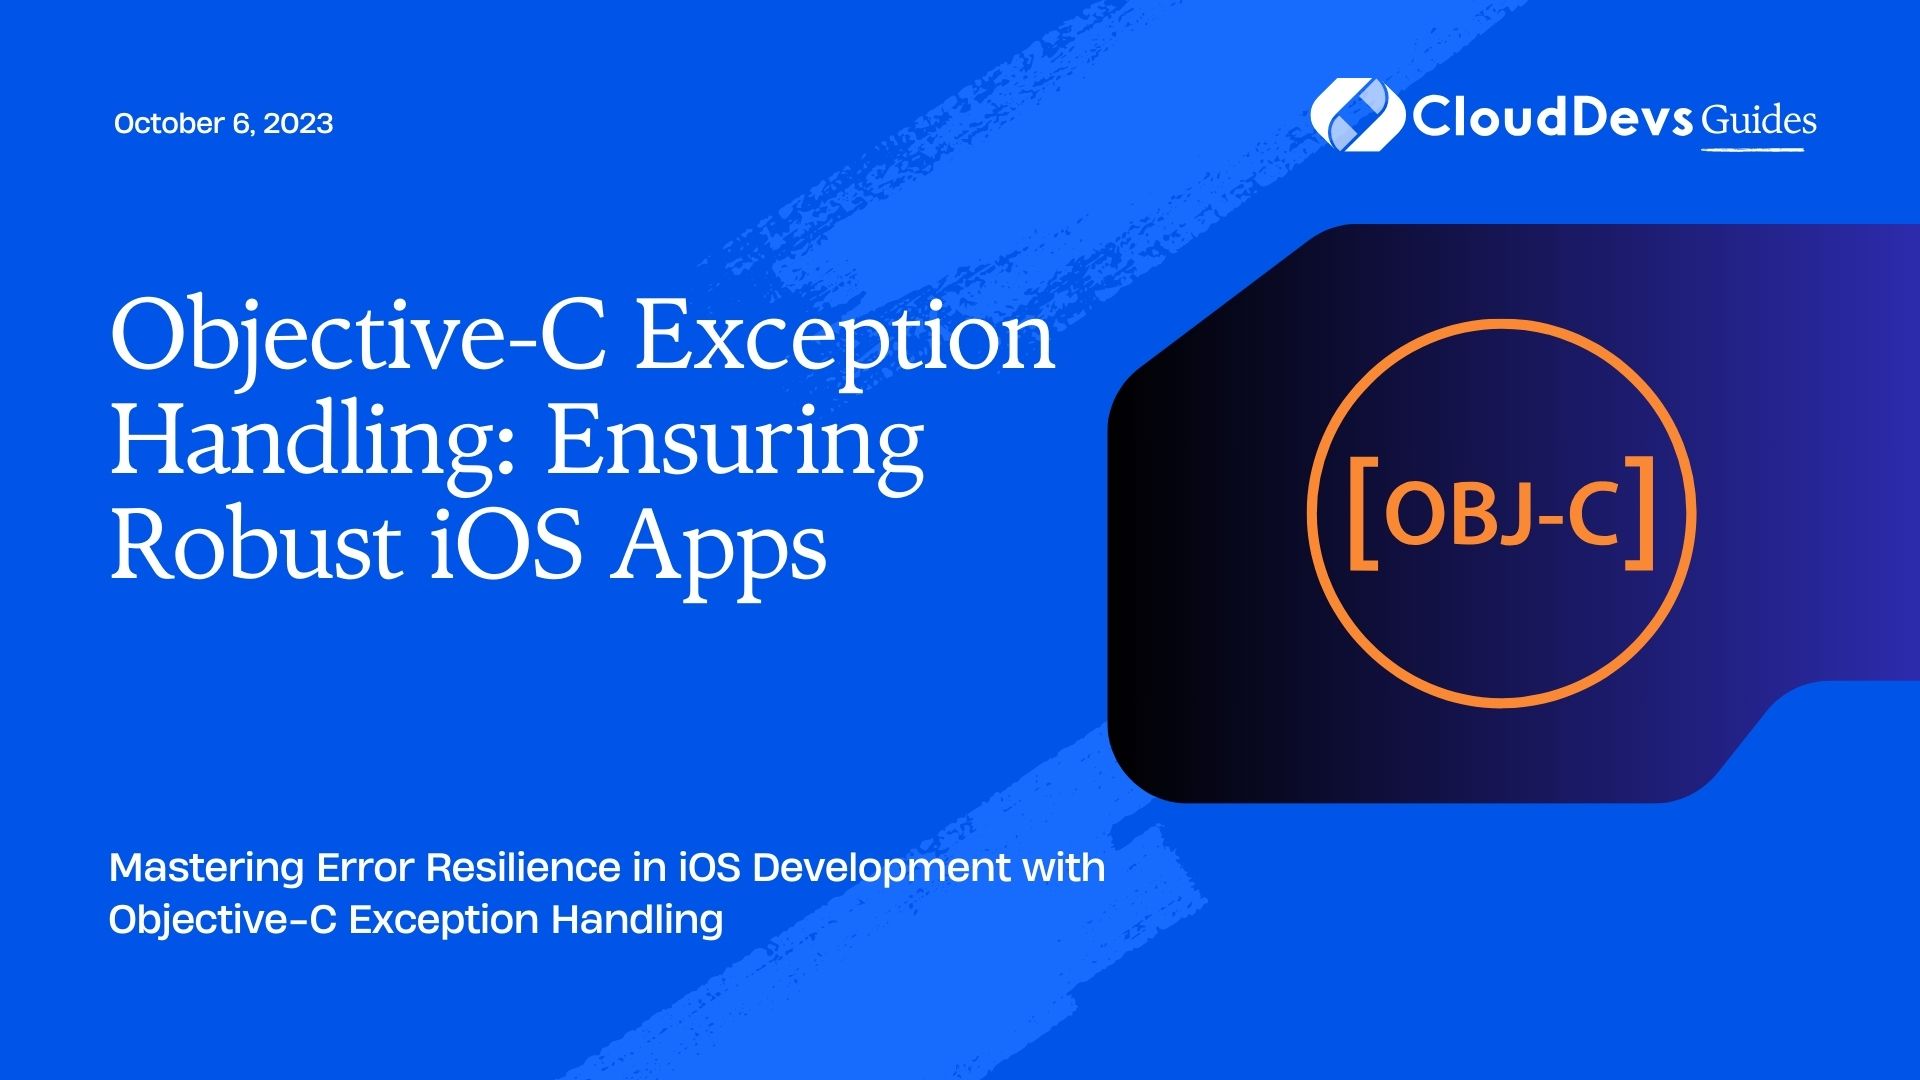 Objective-C Exception Handling: Ensuring Robust iOS Apps